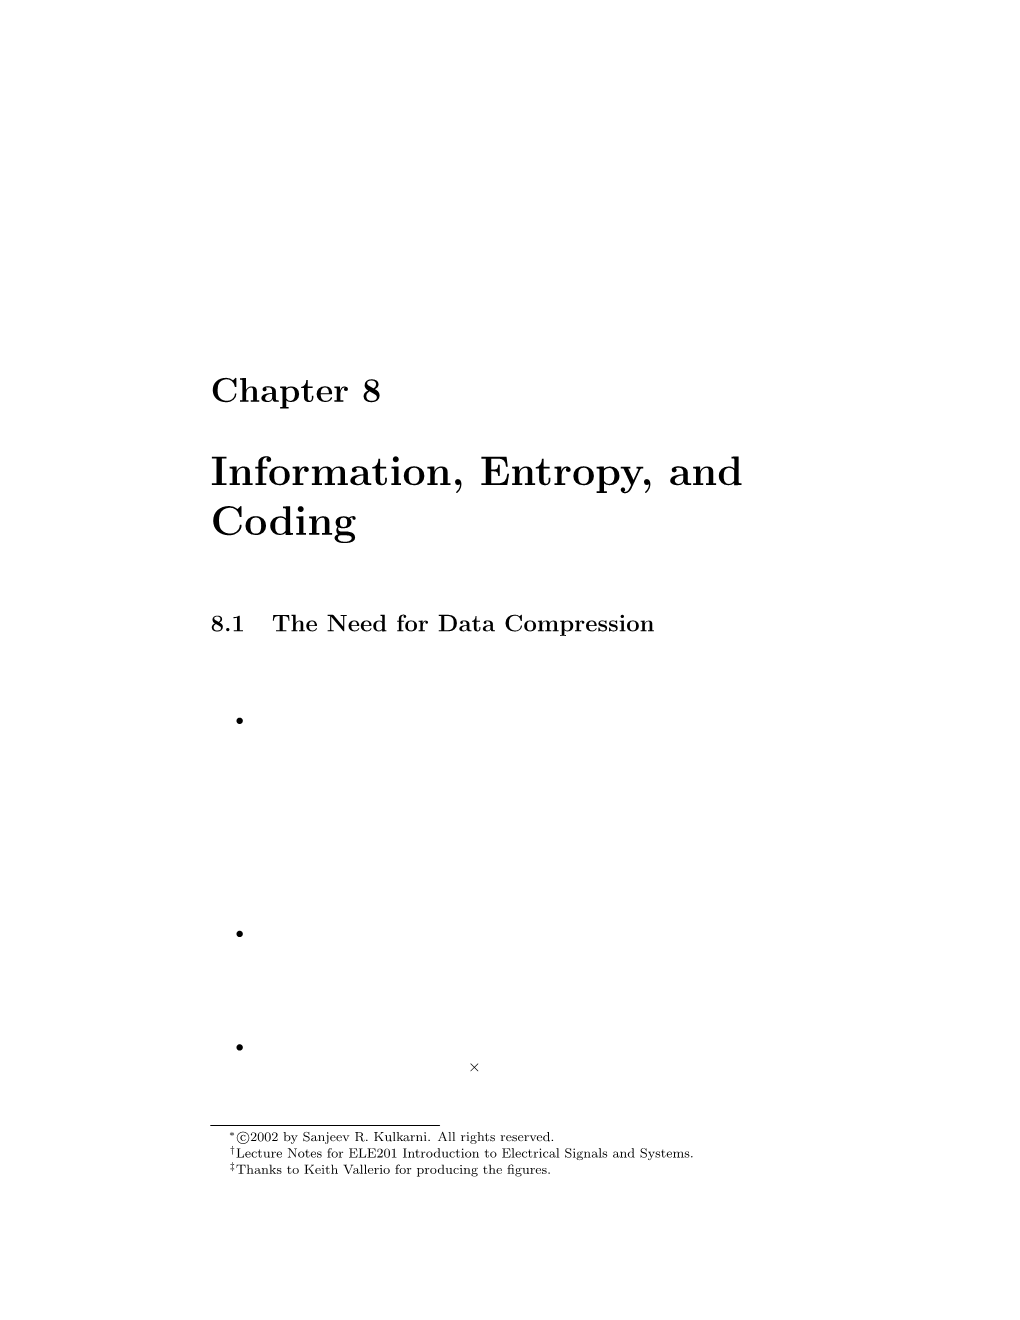 Chapter 8: Information, Entropy, and Coding